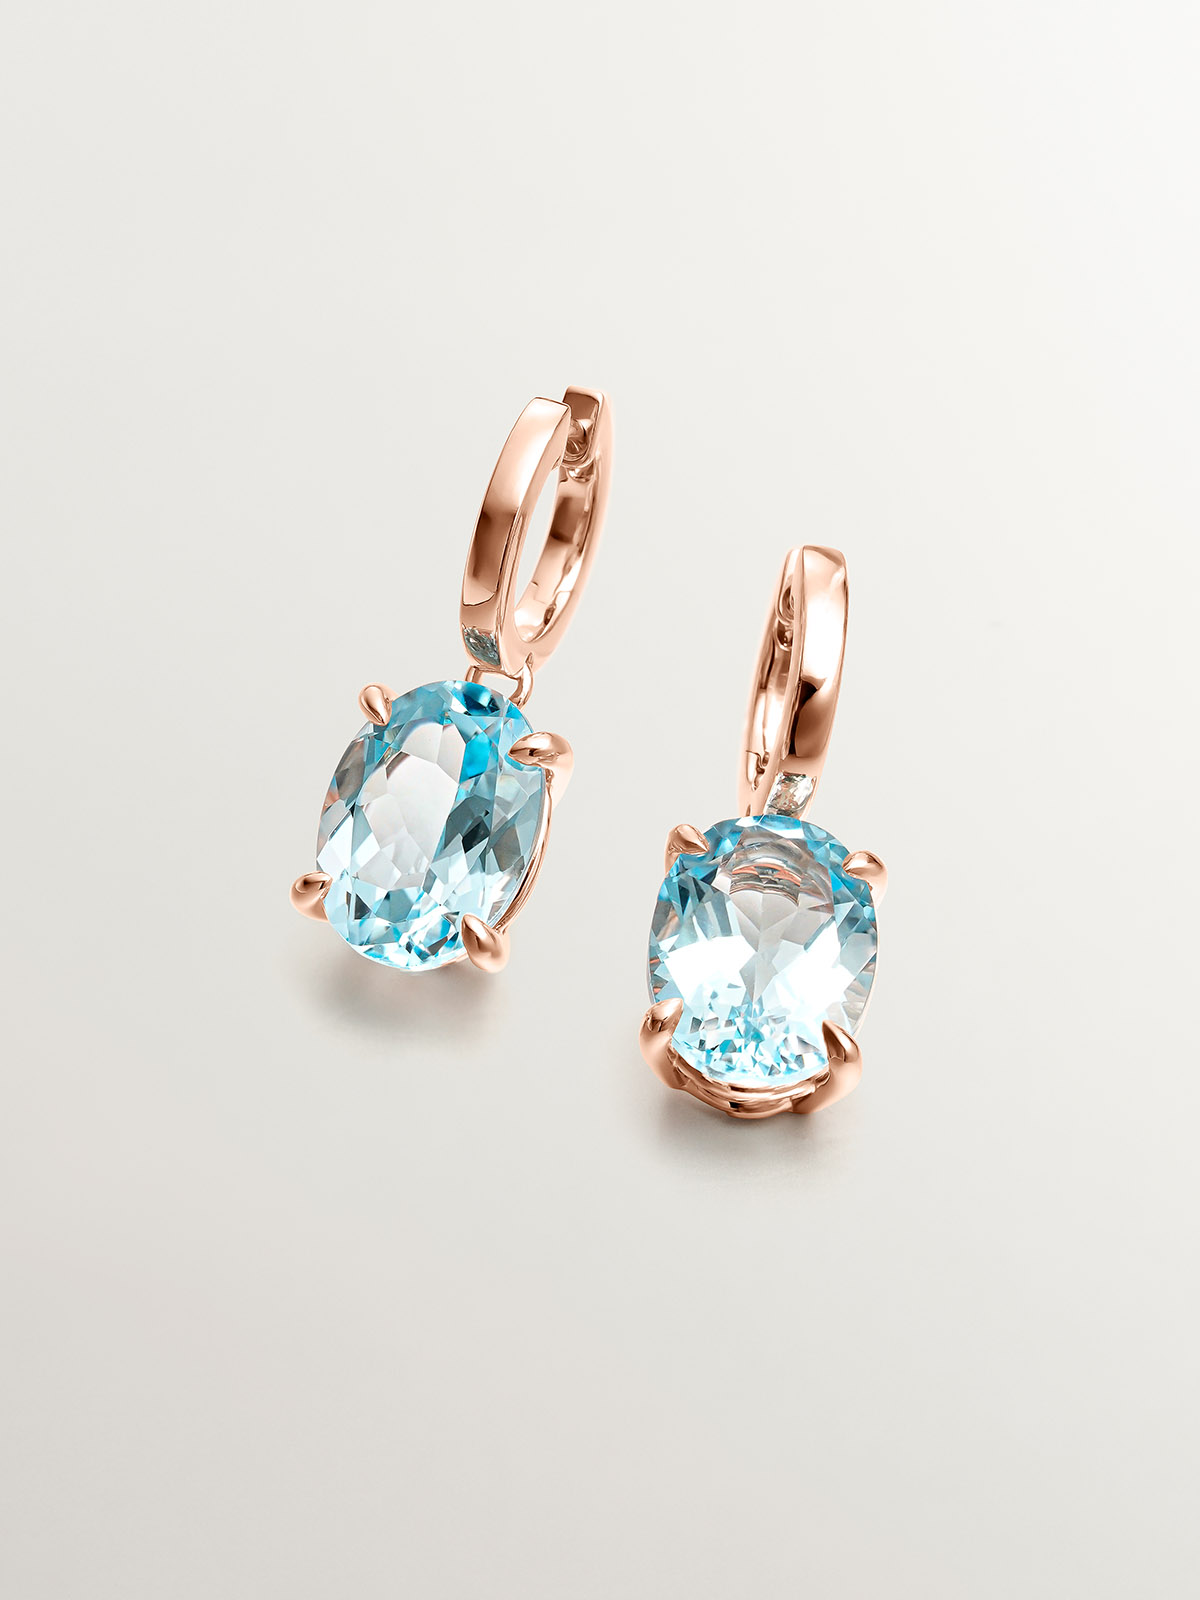 Large hoop earrings made of 925 silver plated in 18K rose gold with sky blue topaz.